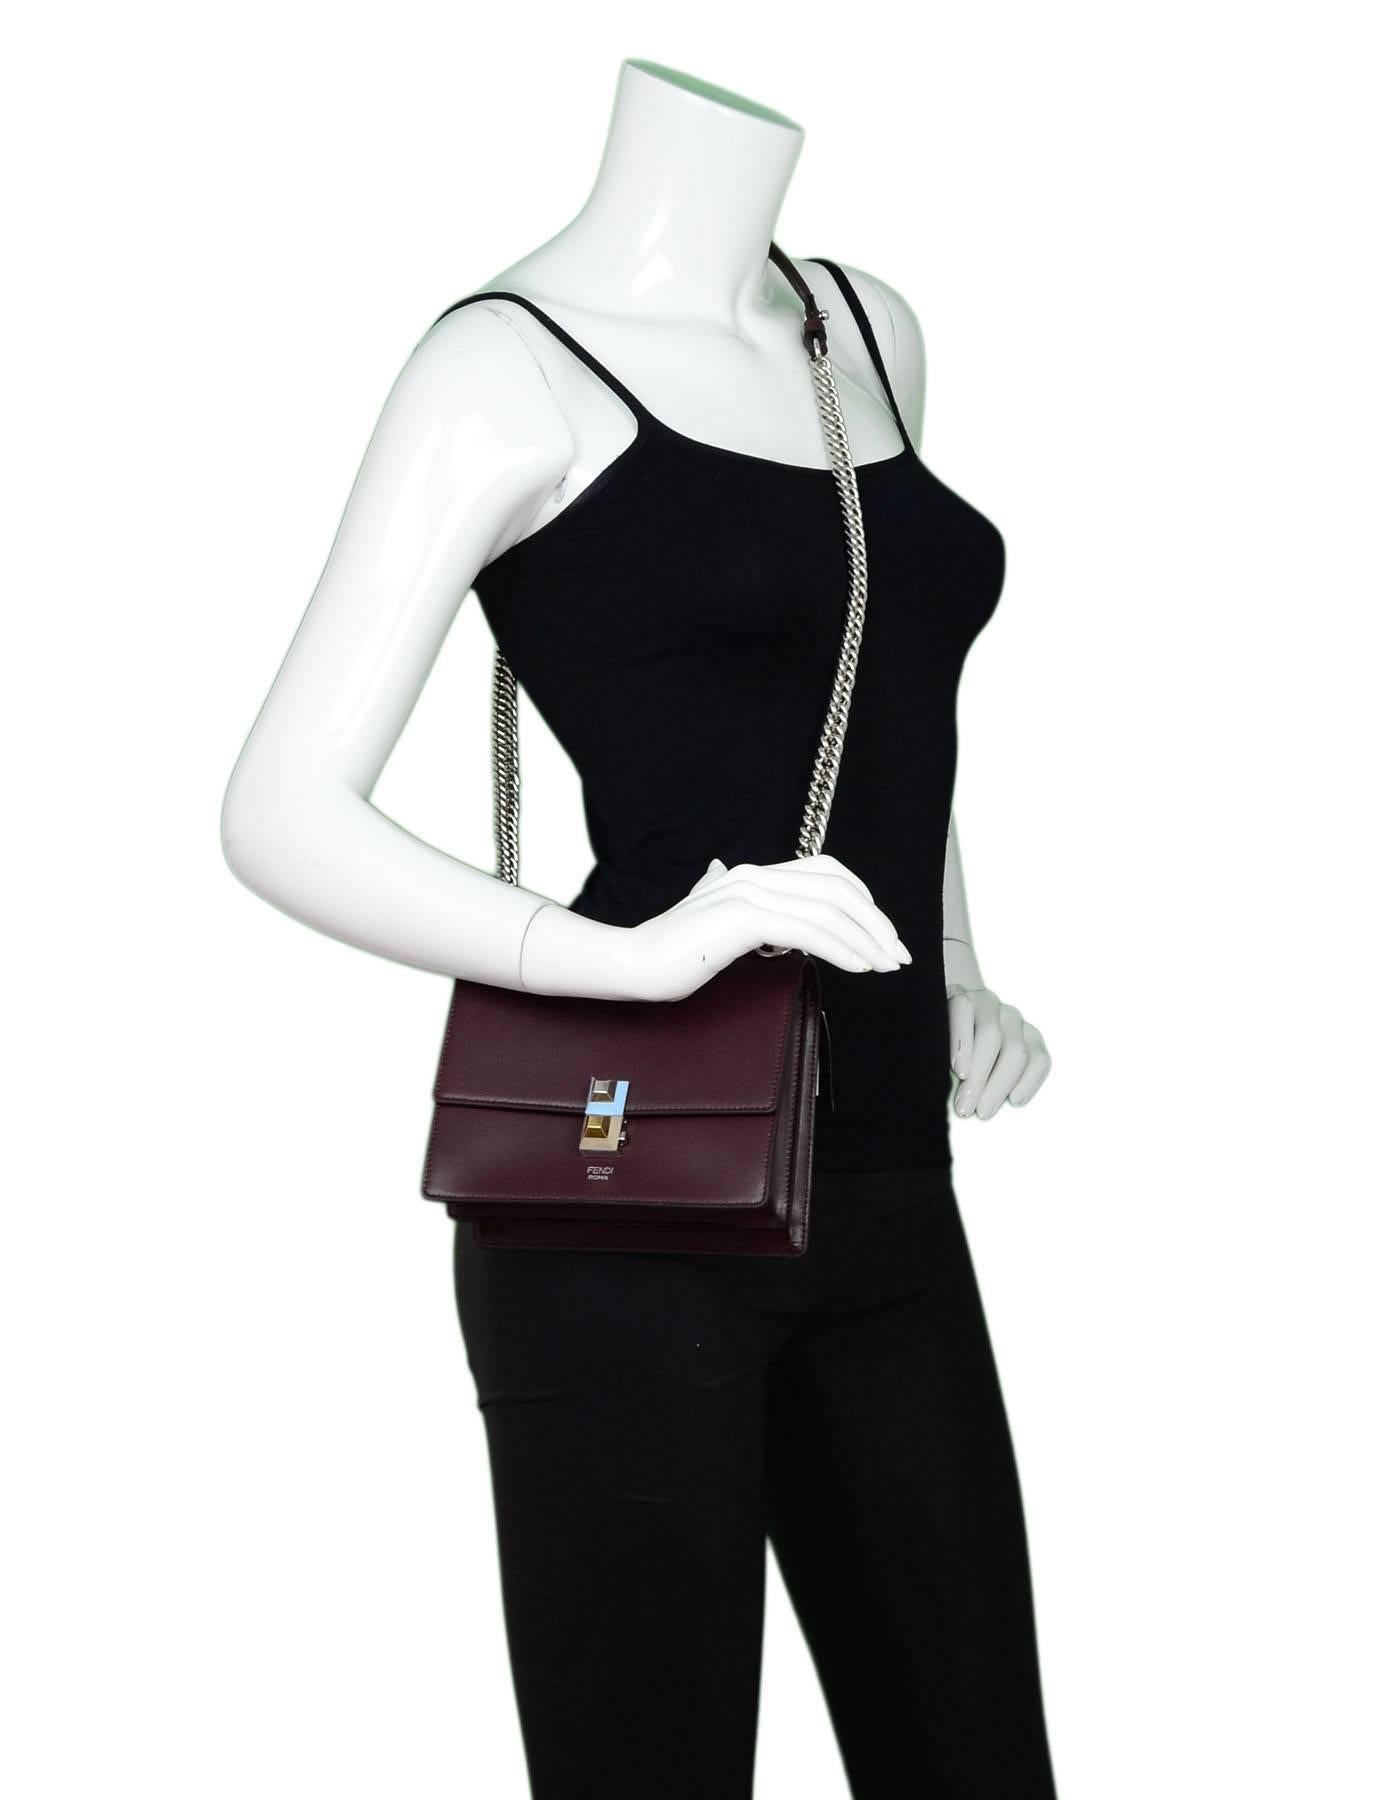 Fendi Burgundy Leather Kan I Small Shoulder Bag
Can be worn as a crossbody or shoulder bag

Made In: Italy
Color: Burgundy
Hardware: Silvertone
Materials: Leather, metal
Lining: Burgundy suede
Closure/Opening: Flap top with side push-lock
Exterior